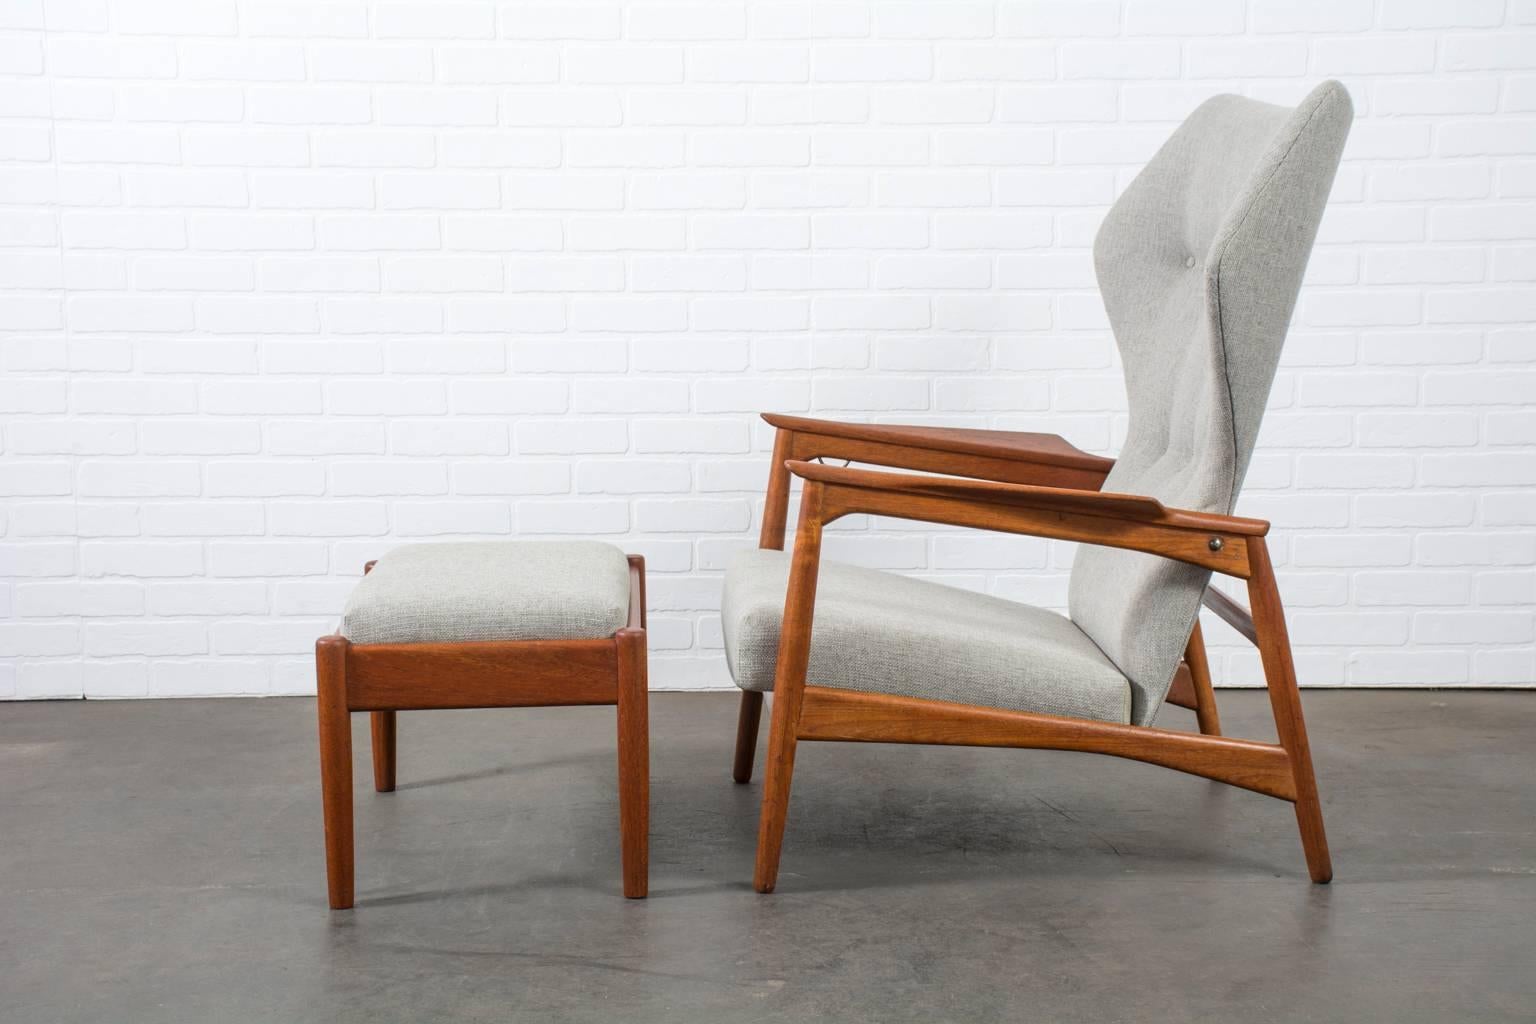 This is a vintage Mid-Century high back lounge chair and ottoman designed by Ib Kofod-Larsen for Carlo Gahrn in 1954. It has a solid teak frame and has been professionally reupholstered in a grey fabric. Can be adjusted in three positions. Beautiful